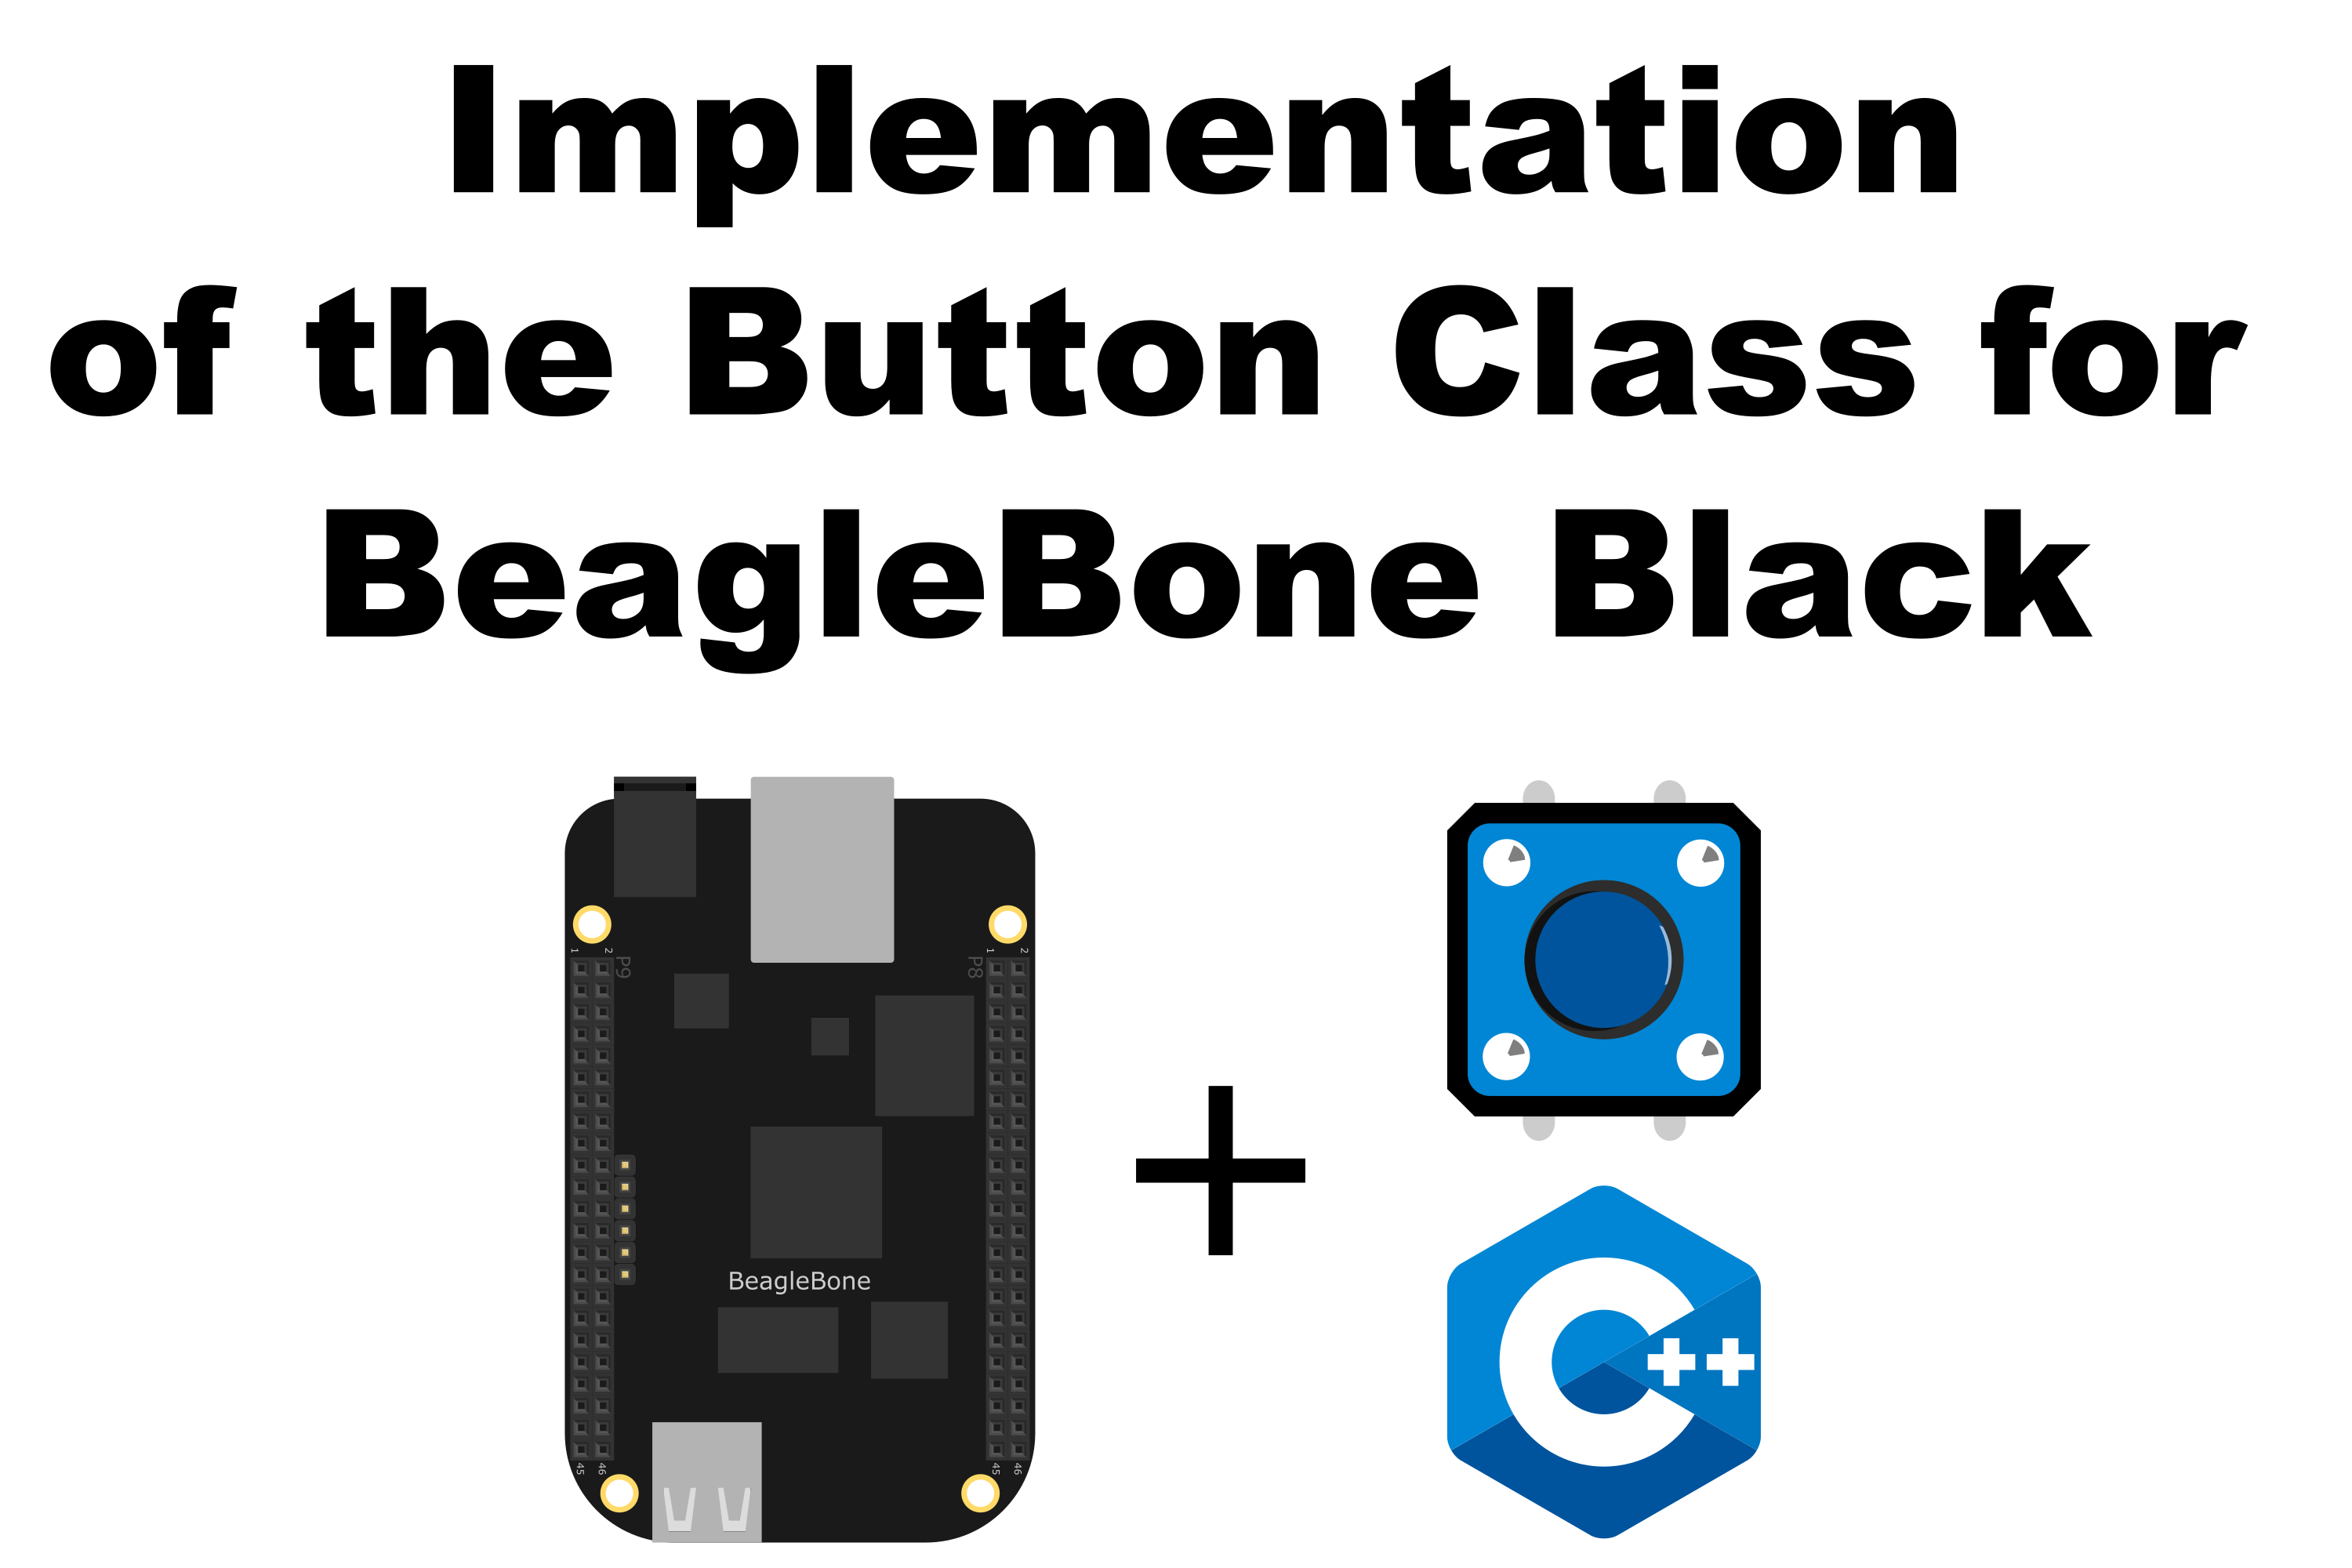 Implementation of the BUTTON Class for BeagleBone Black